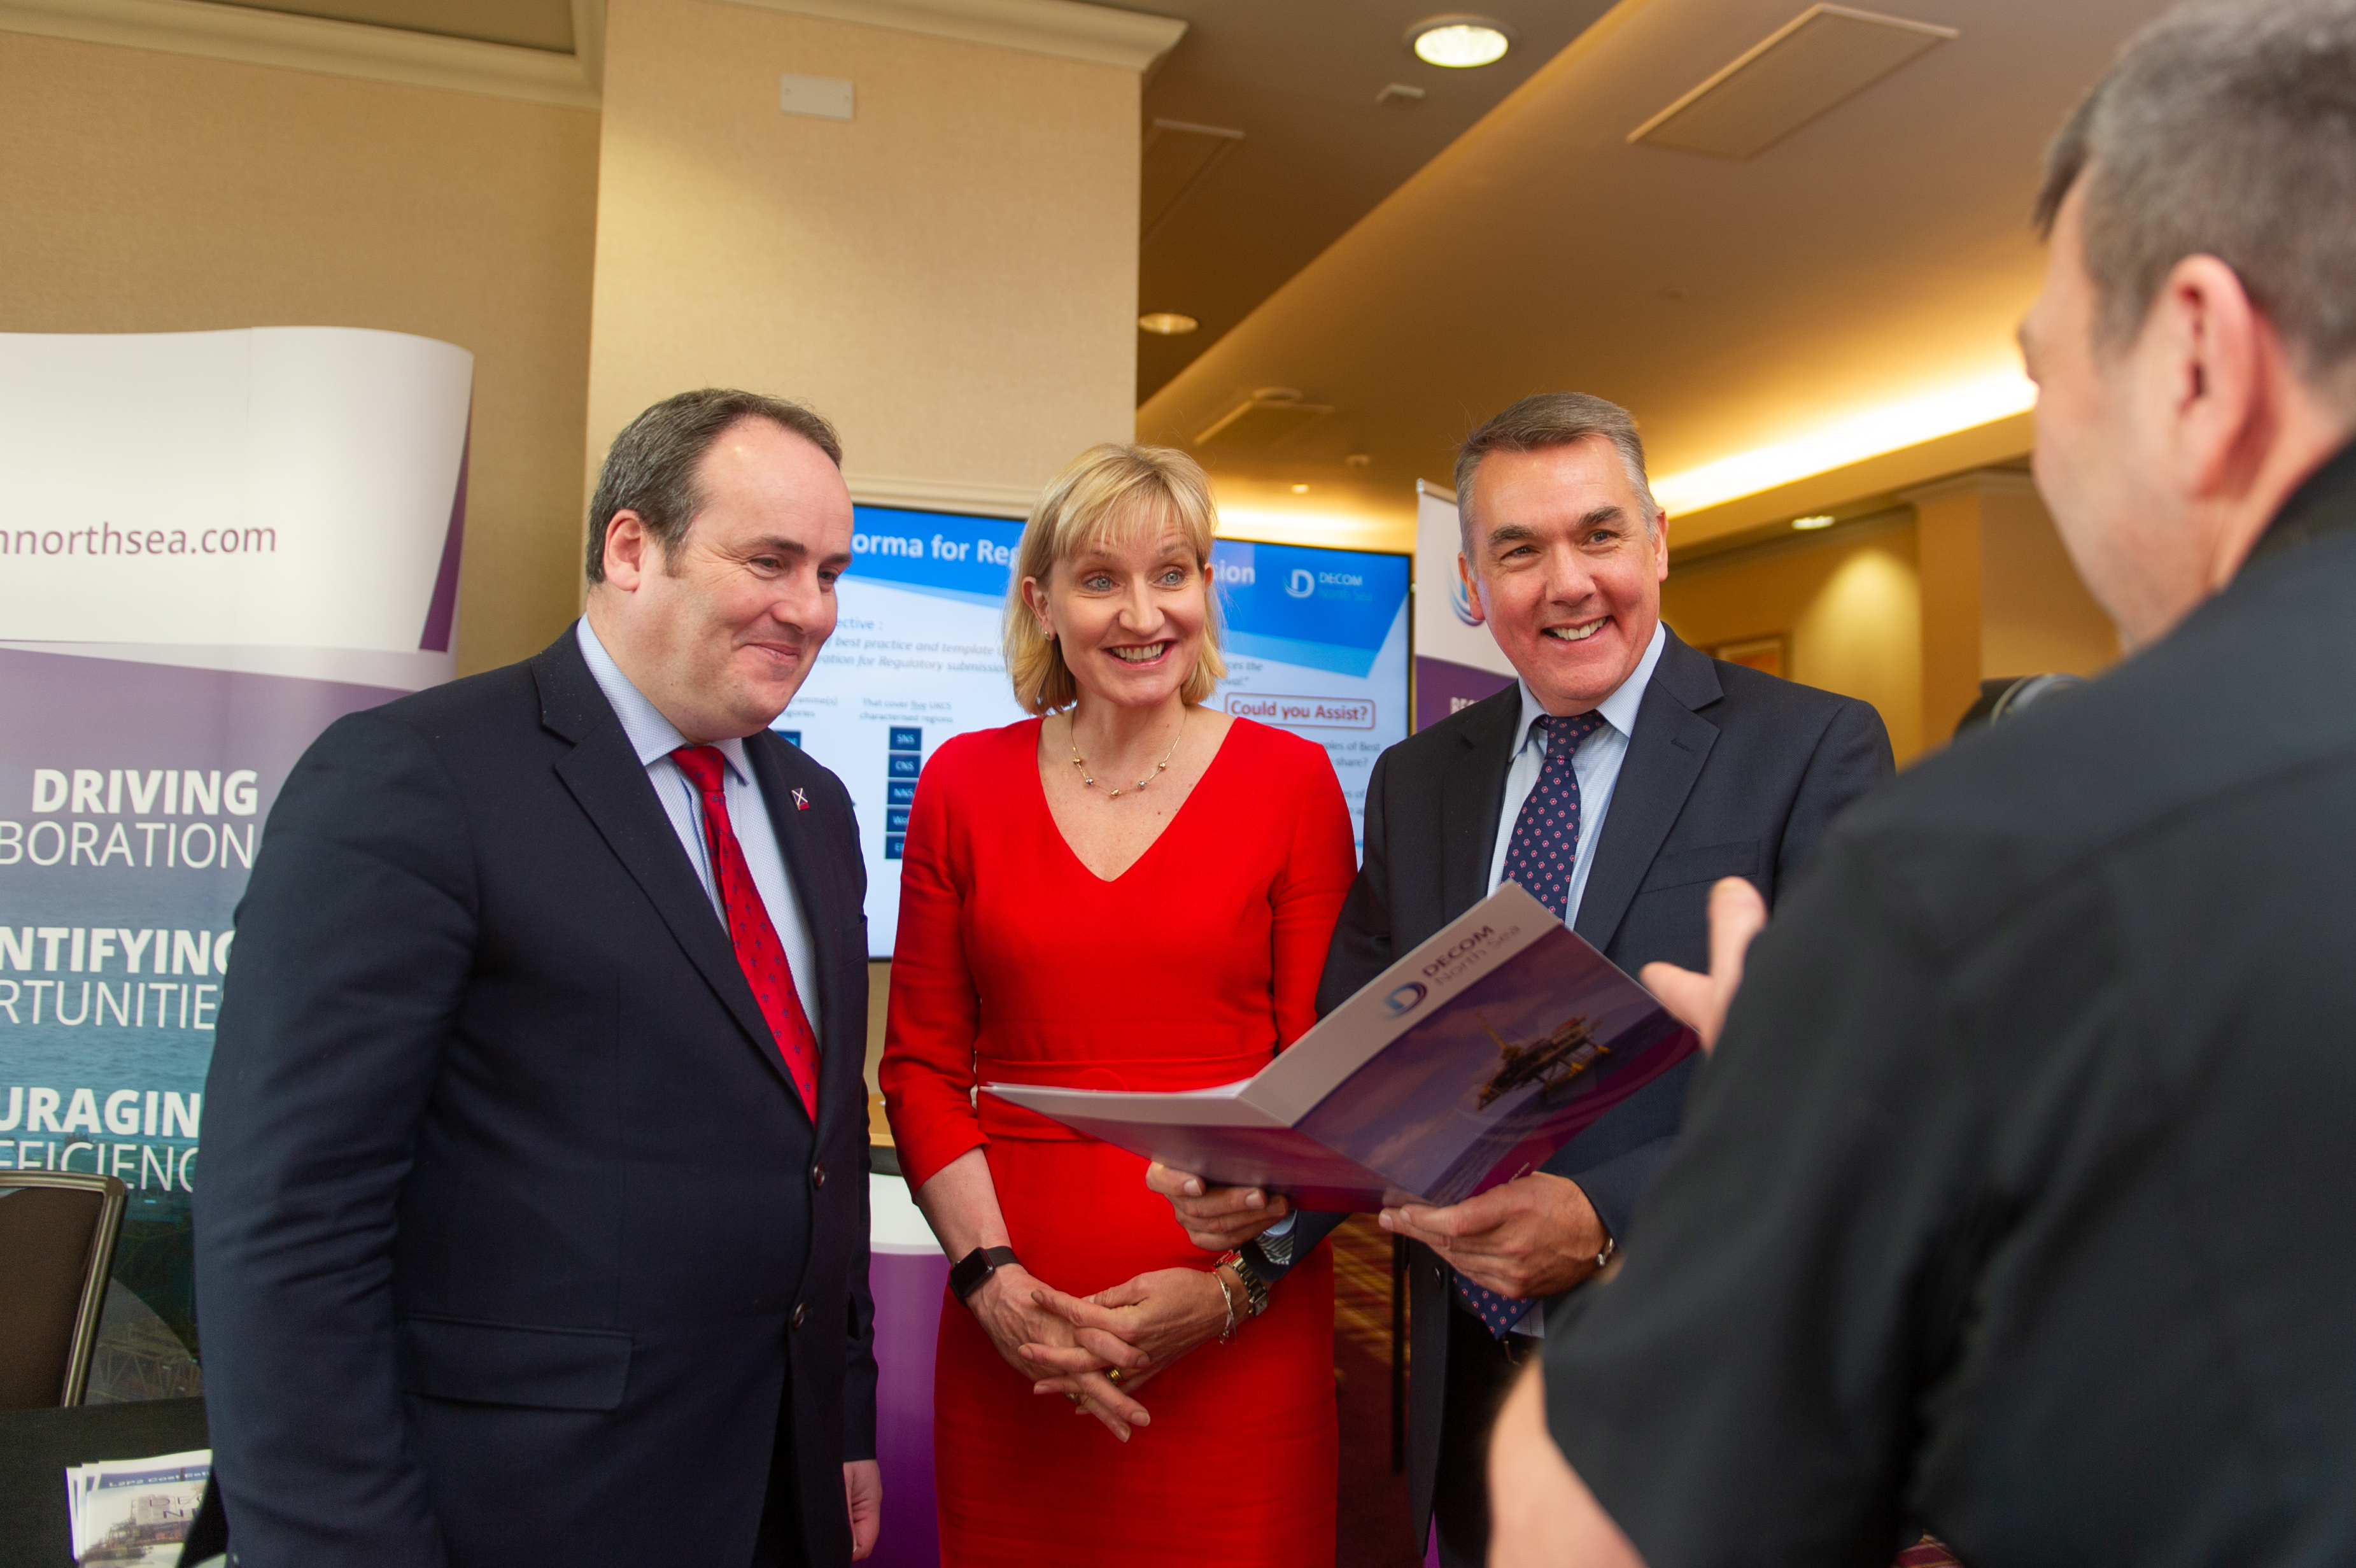 l to r - Paul Wheelhouse MSP Minister for Energy, Connectivity and the Islands, Deirdre Michie (Chief Executive Oil & Gas UK) and John Warrender (Chief Executive Decom North Sea),